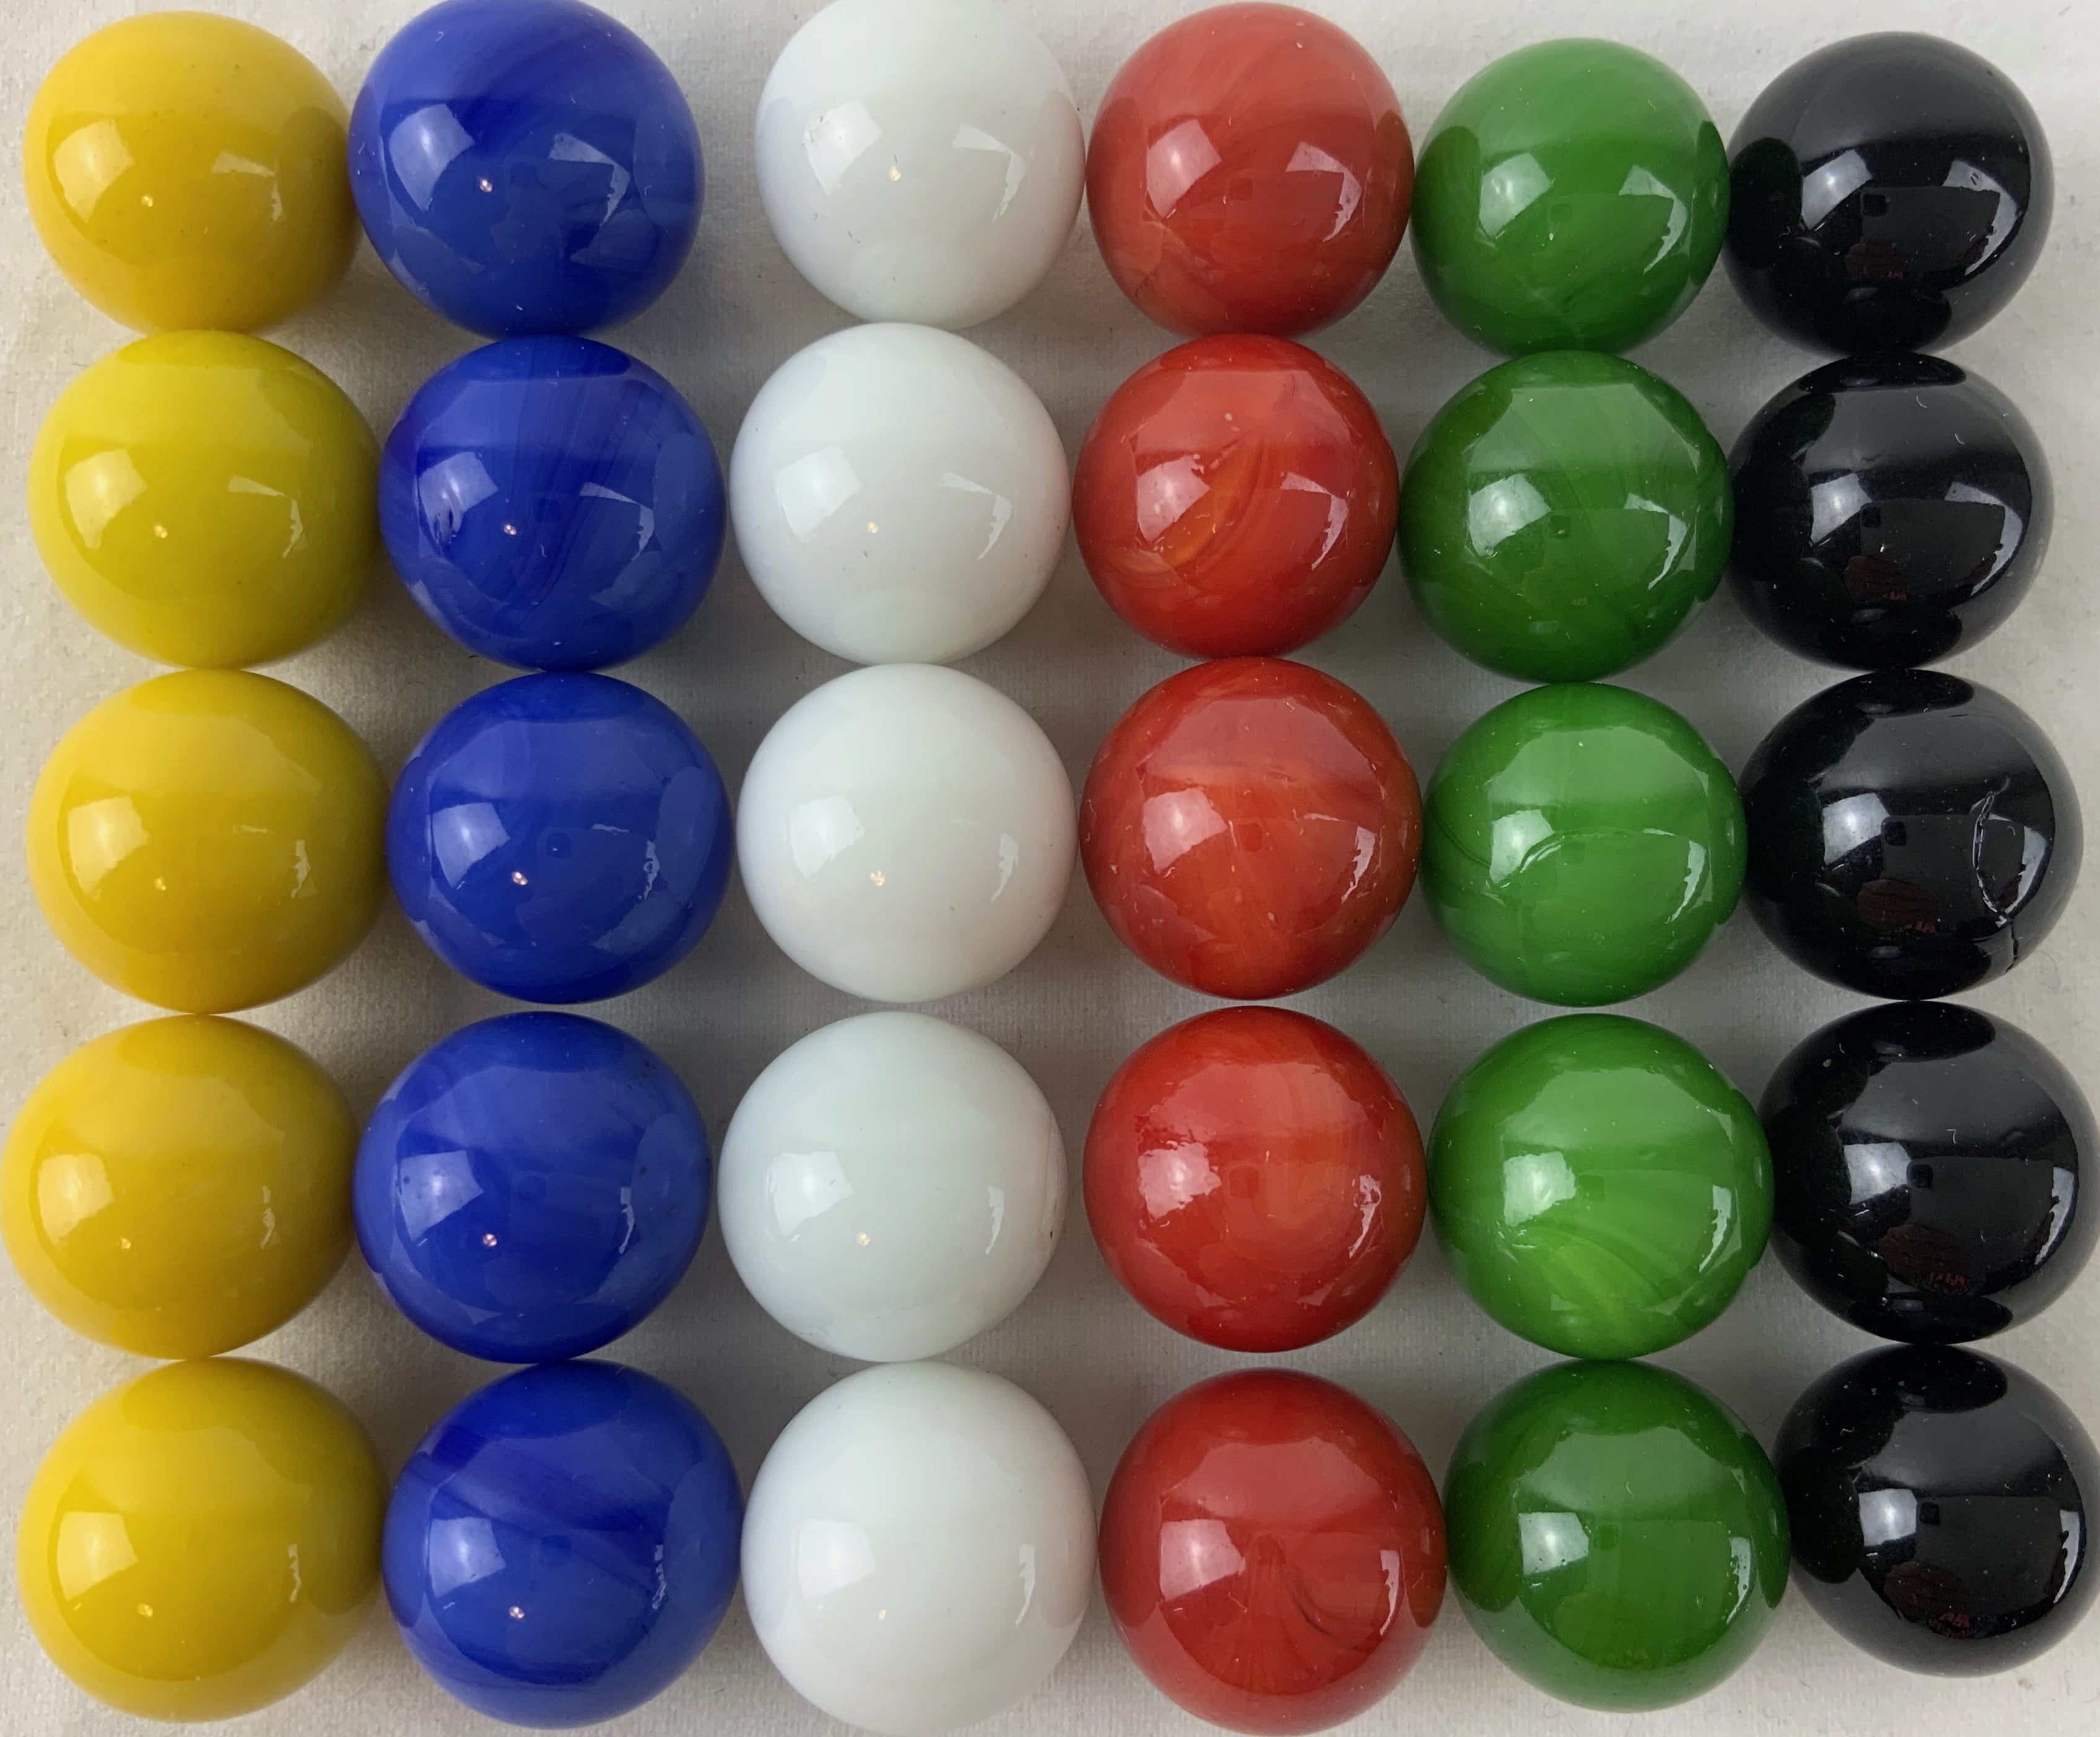 OFFICIAL Mega Marbles Vacor Game Replacement Marbles 60 pcs! 